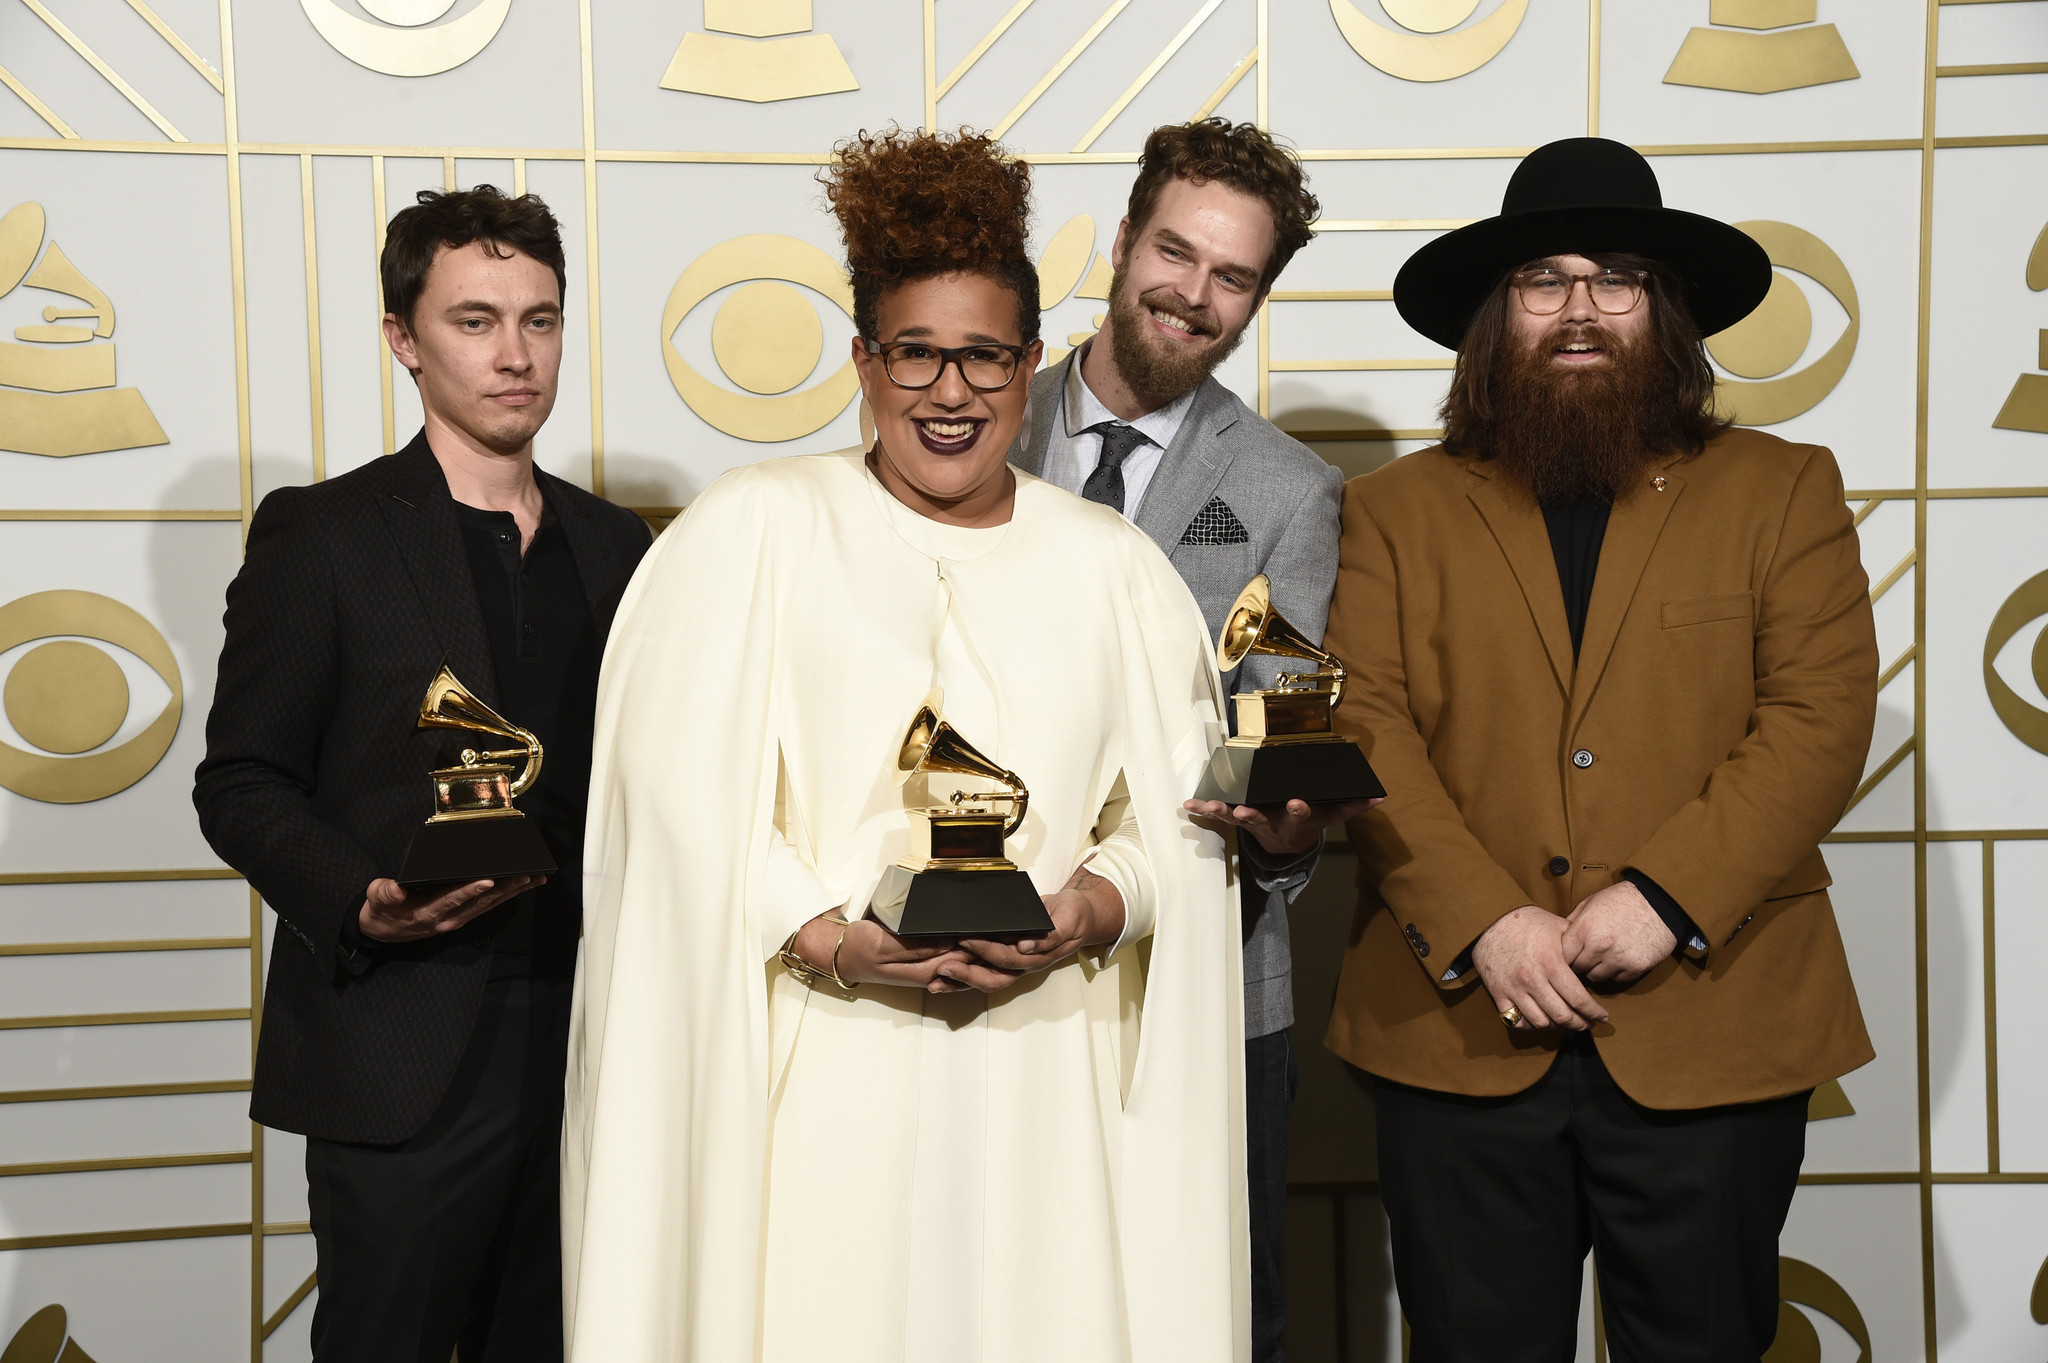 Alabama Shakes to play 2 Chicago shows in July - Chicago Tribune2048 x 1363